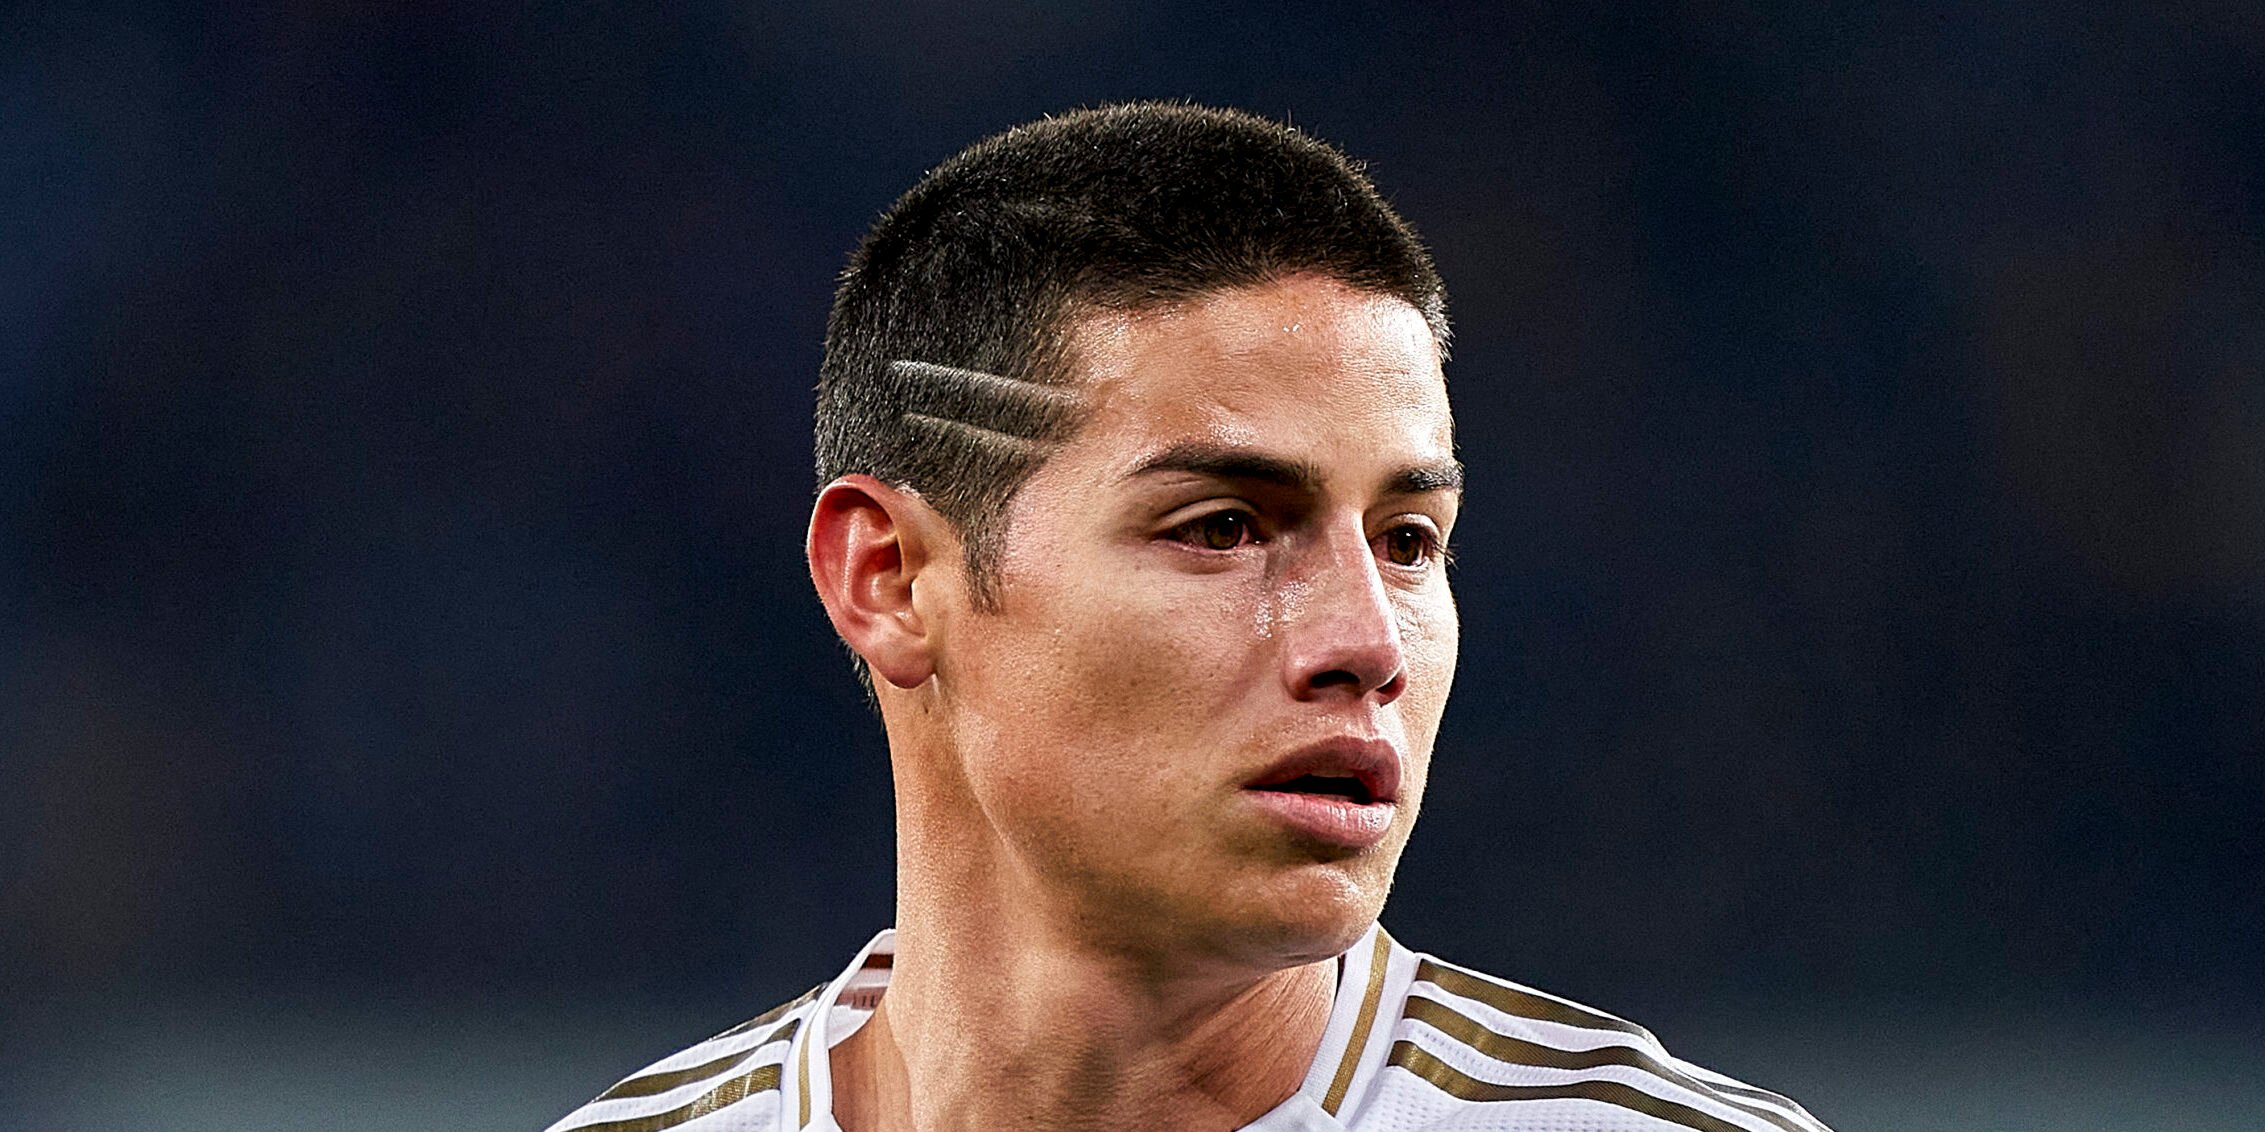 James Rodriguez would like to leave Al-Rayyan to return to Europe, and Roma could be a viable landing spot as Mourinho wanted him at Manchester United.